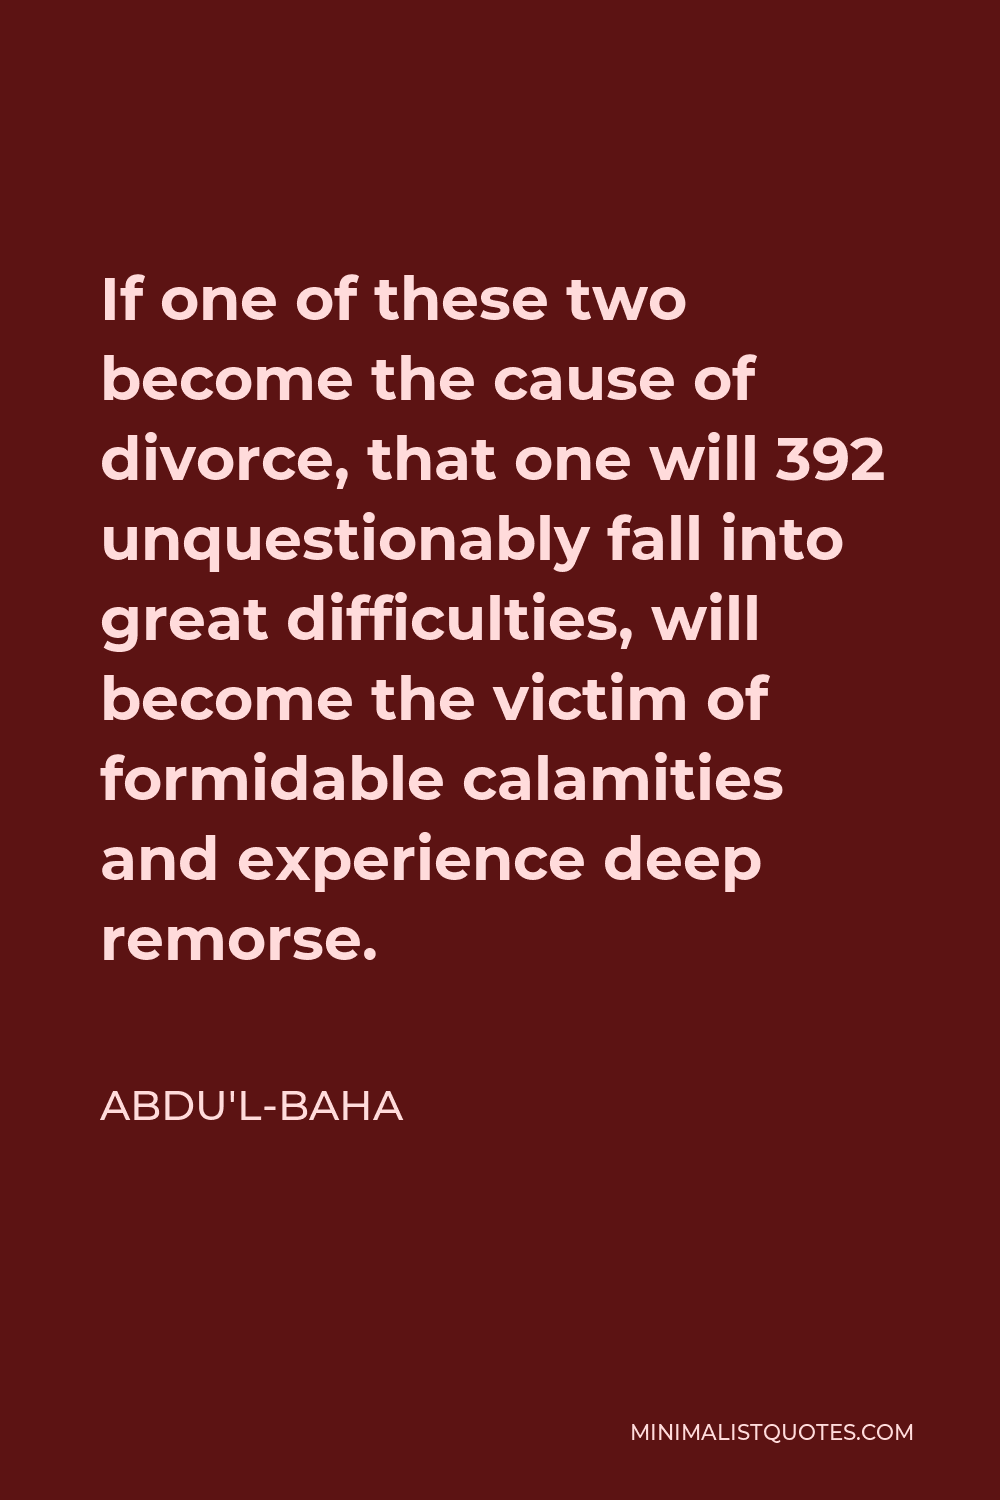 Abdu'l-Baha Quote - If one of these two become the cause of divorce, that one will 392 unquestionably fall into great difficulties, will become the victim of formidable calamities and experience deep remorse.